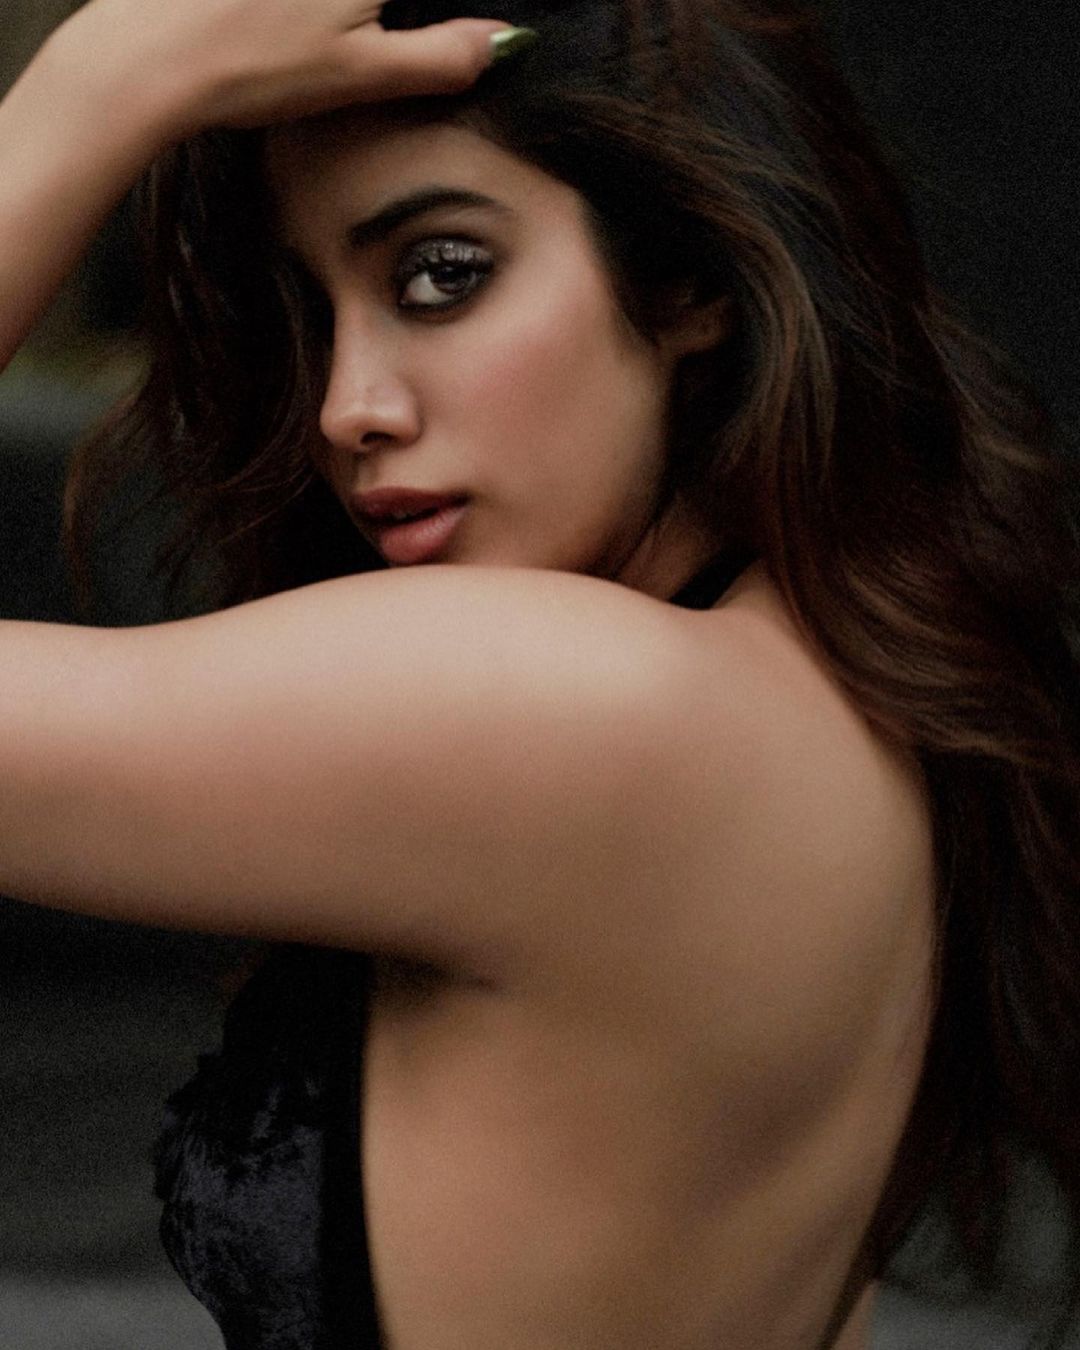  Janhvi Kapoor raises temperature with her smoky eye makeup and nude lips. (Image: Instagram)